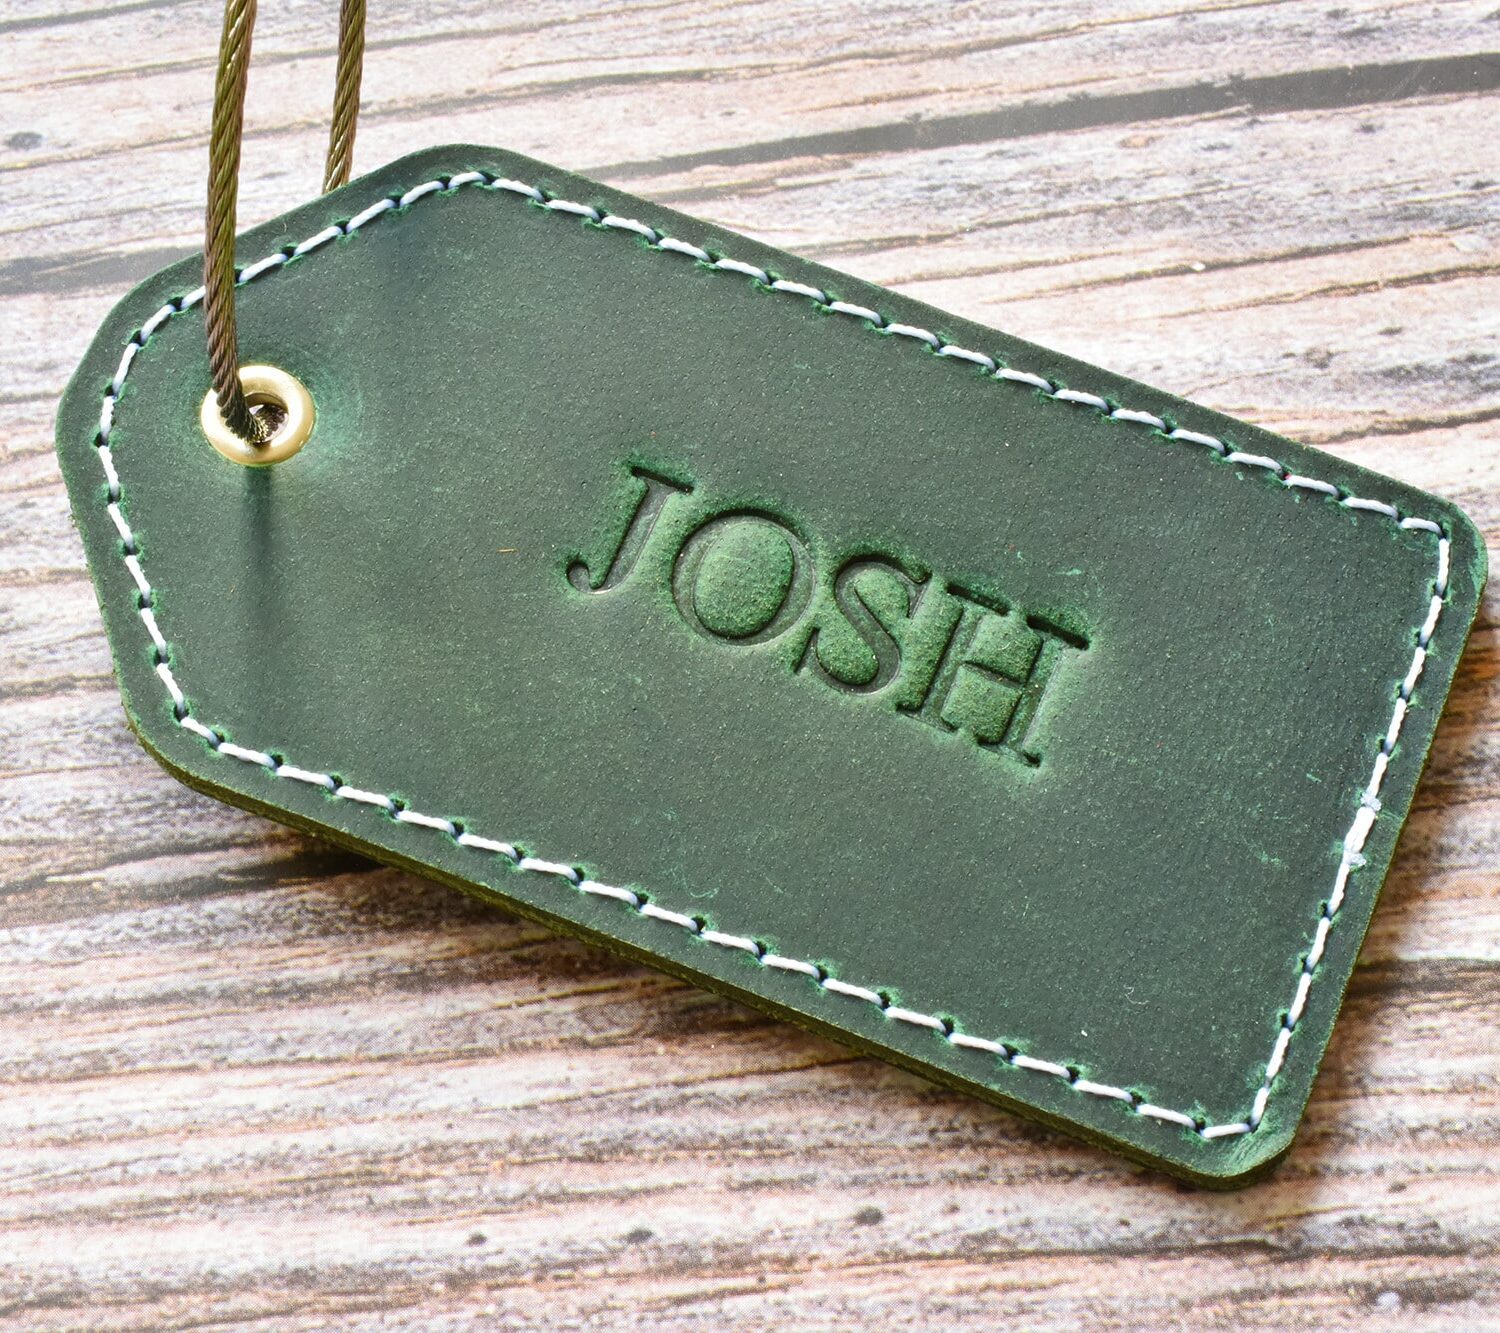 Personalized luggage tag TA 052-7